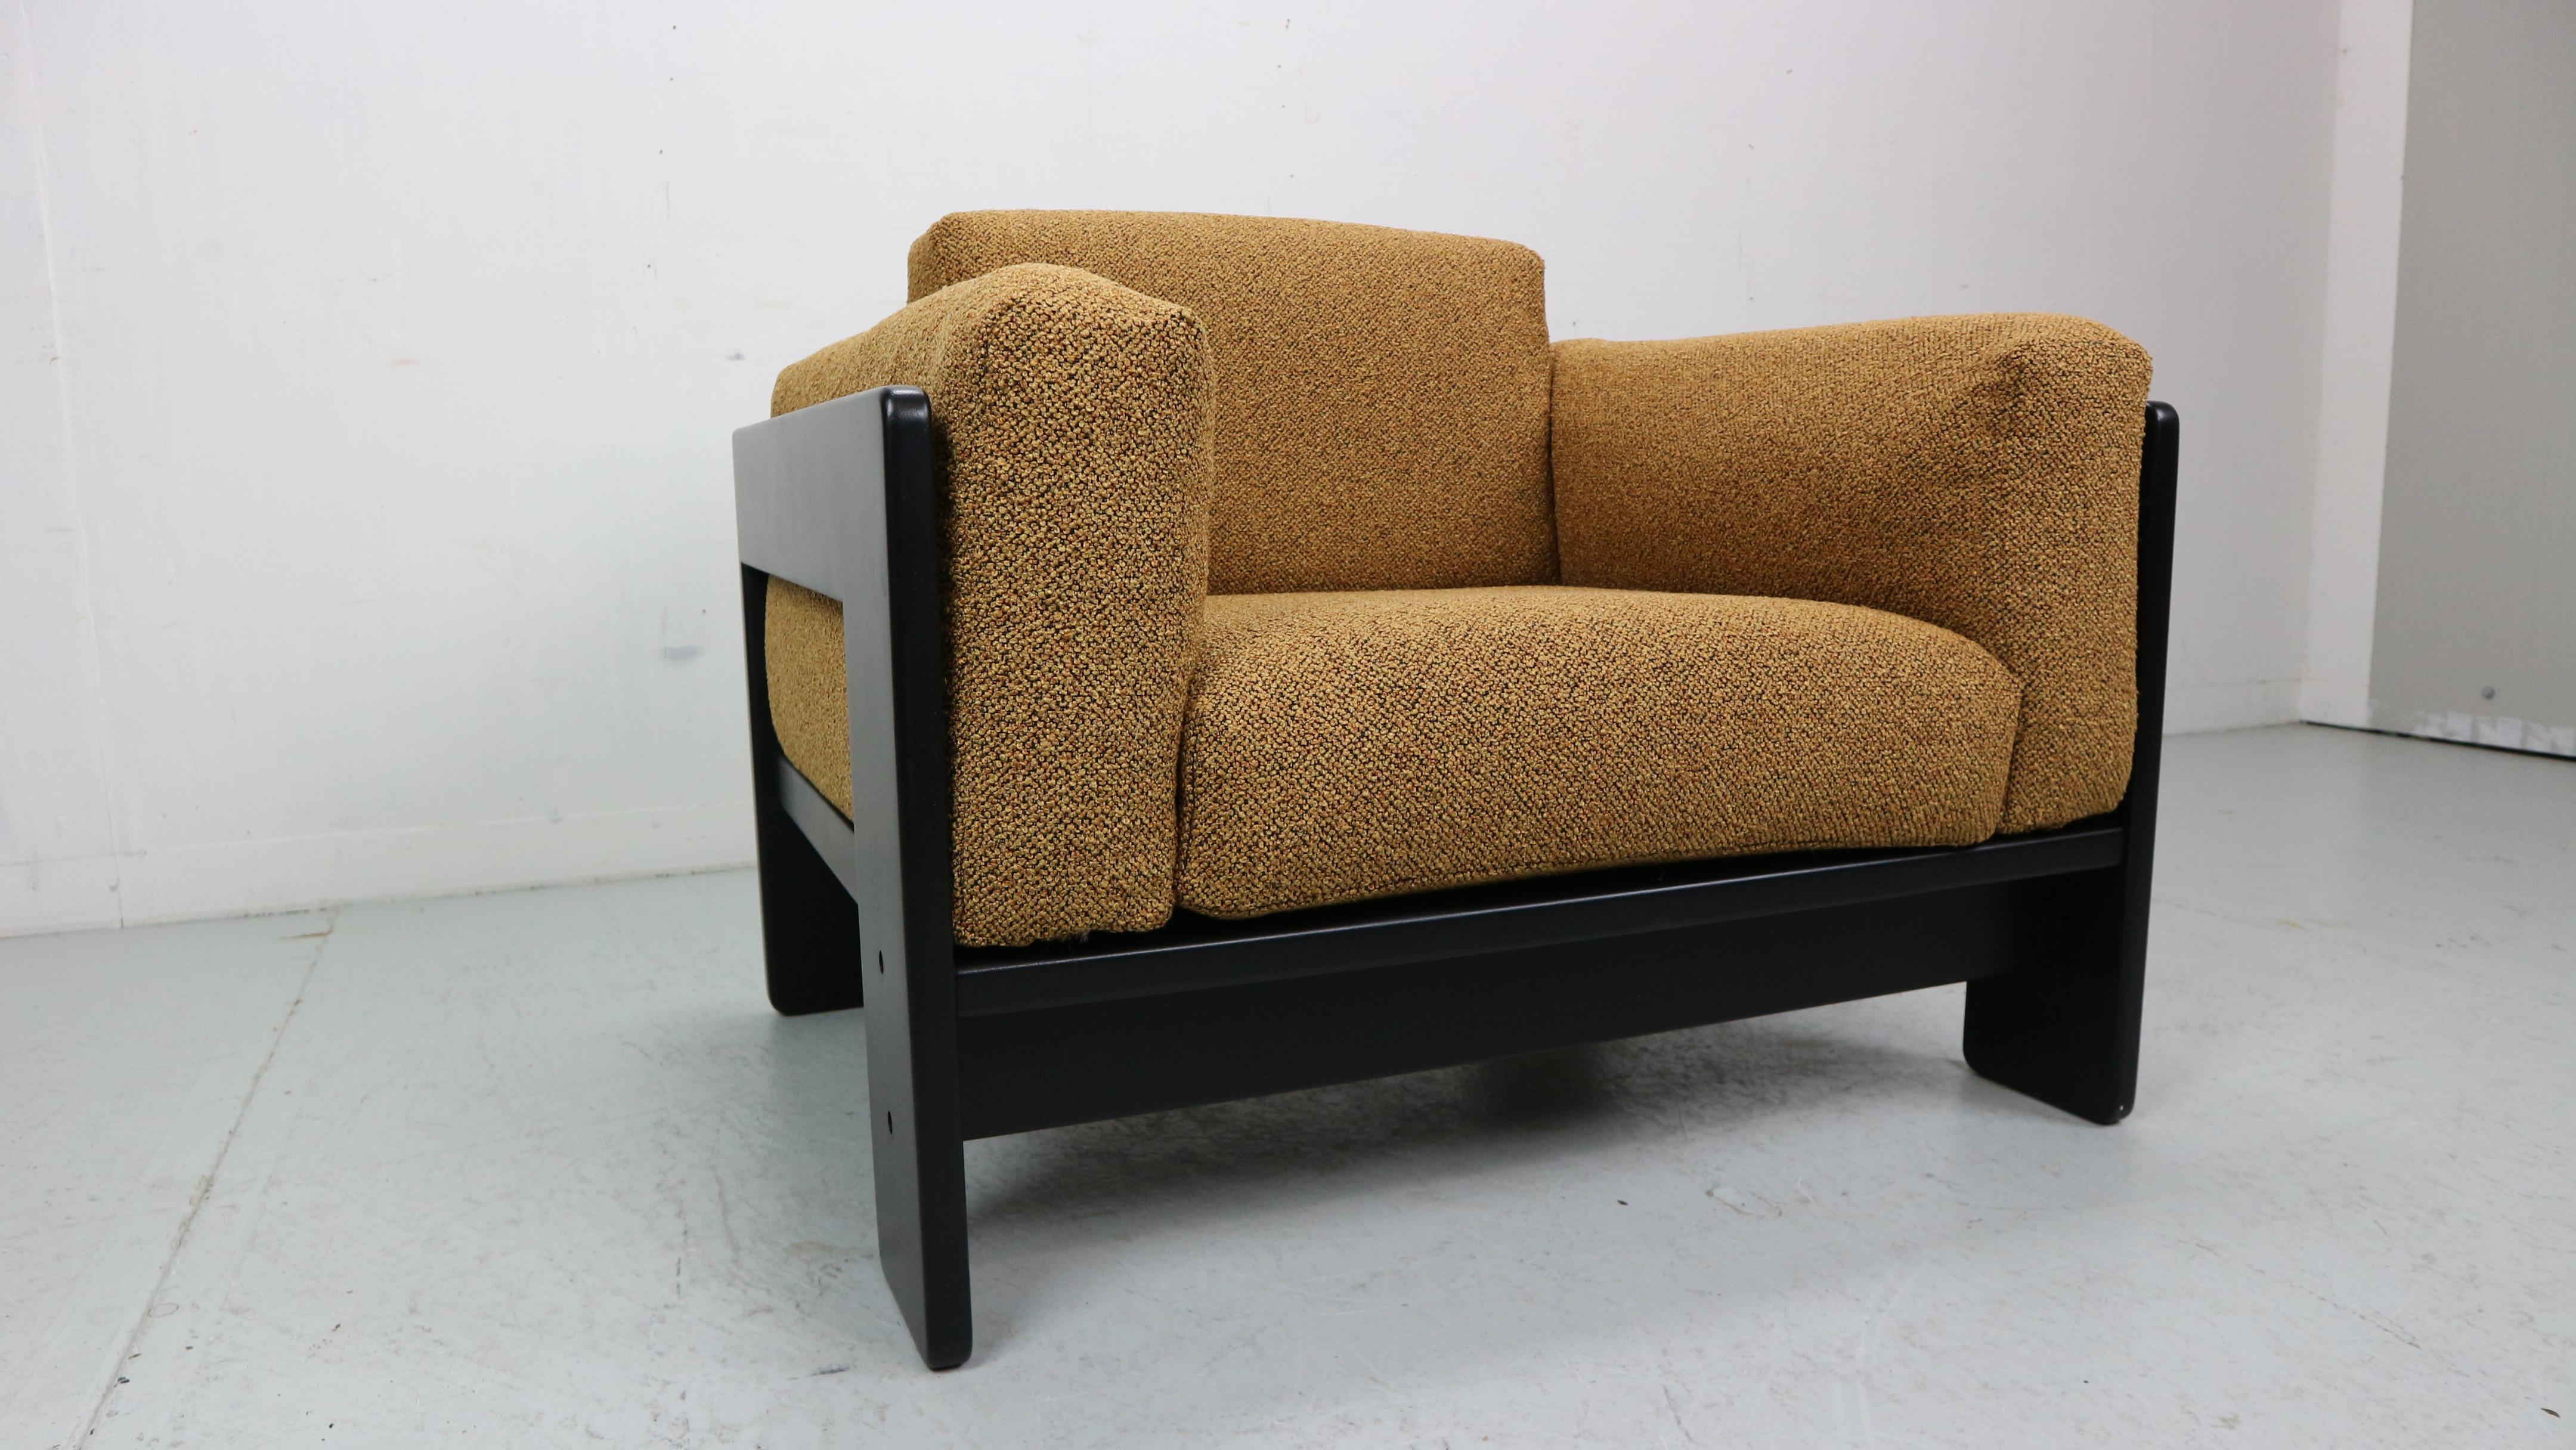 Mid-Century Modern Bastiano Armchair by Afra E Tobia Scarpa for Gavina 70s newly upholstered.